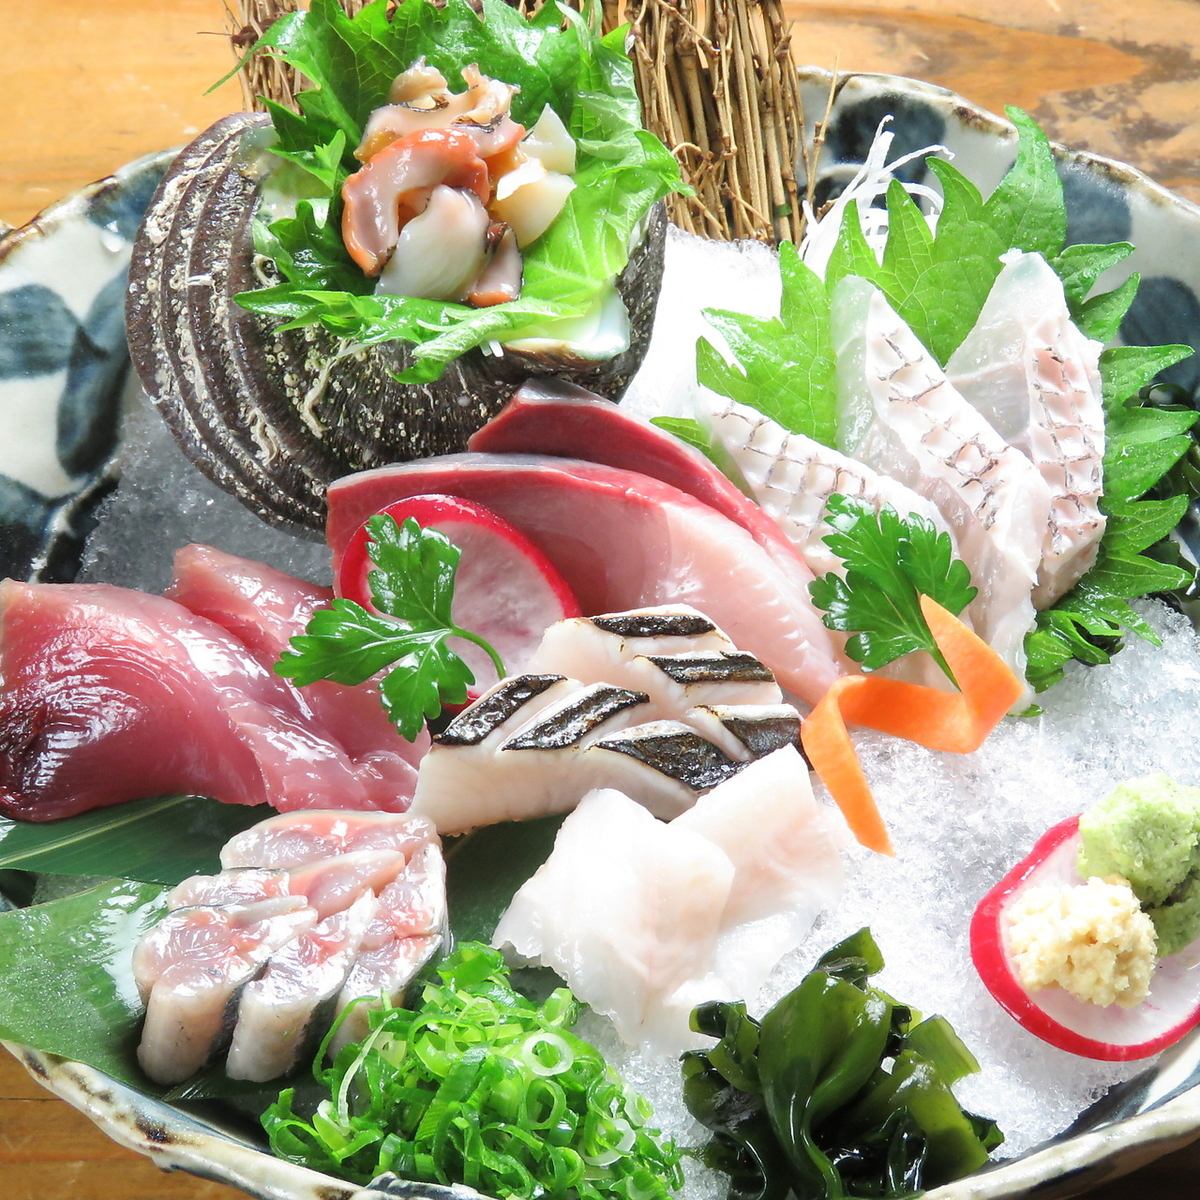 The seafood dishes made by purchasing fresh fish every morning are excellent !!